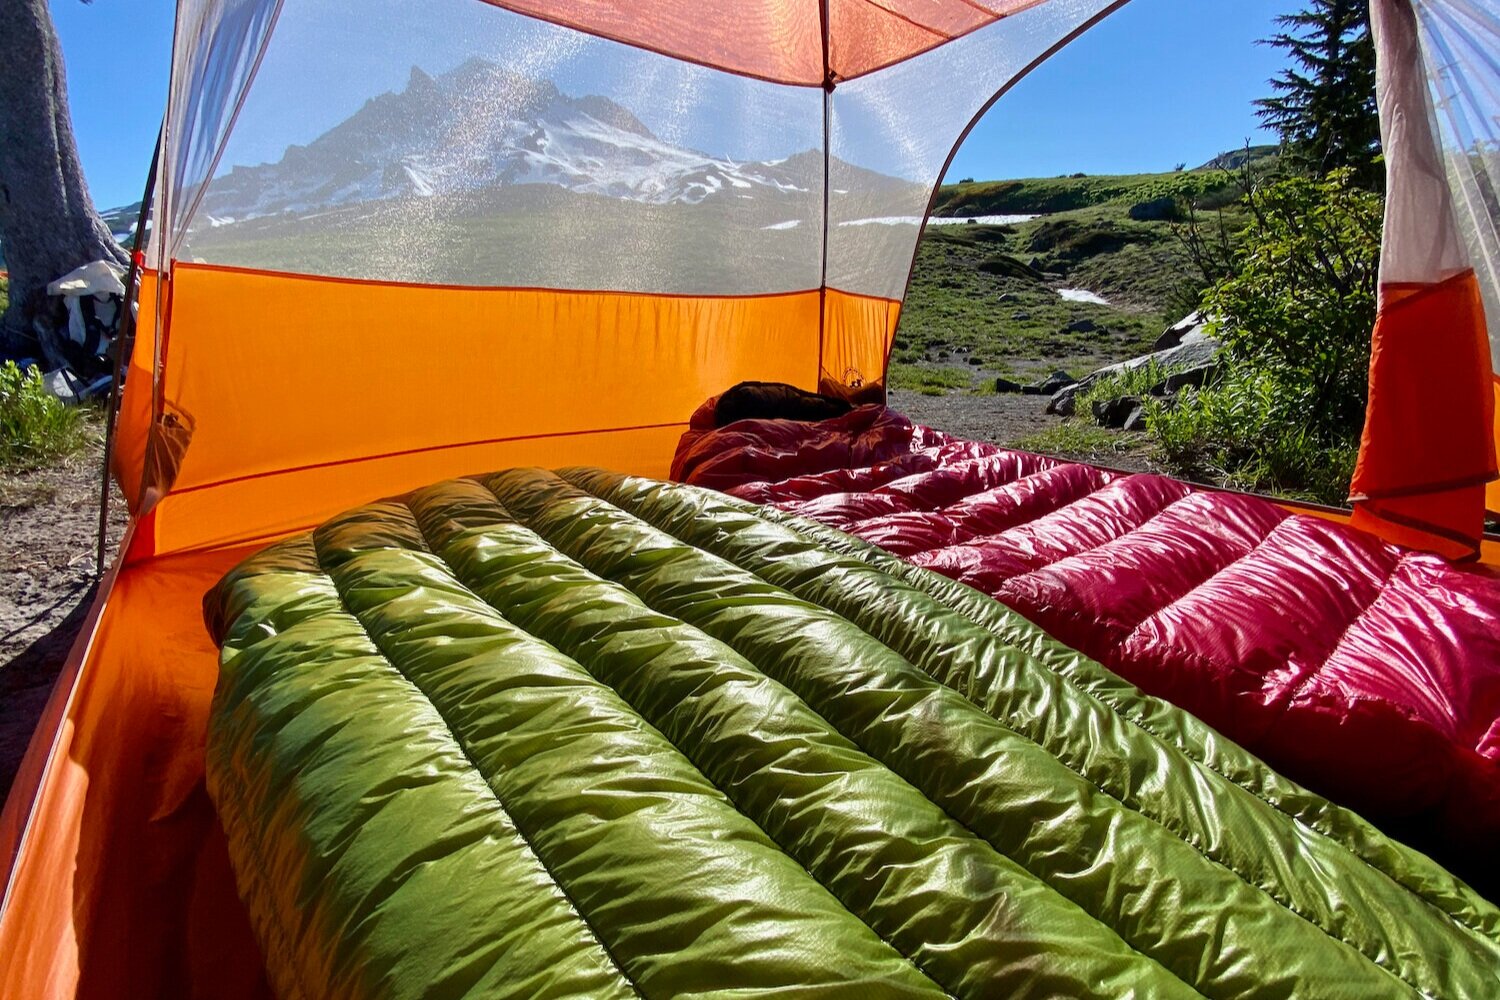 The ZPacks Classic Sleeping Bag (left) and the Western Mountaineering Alpinlite 20° (right) are some of our favorite ultralight sleeping bags.